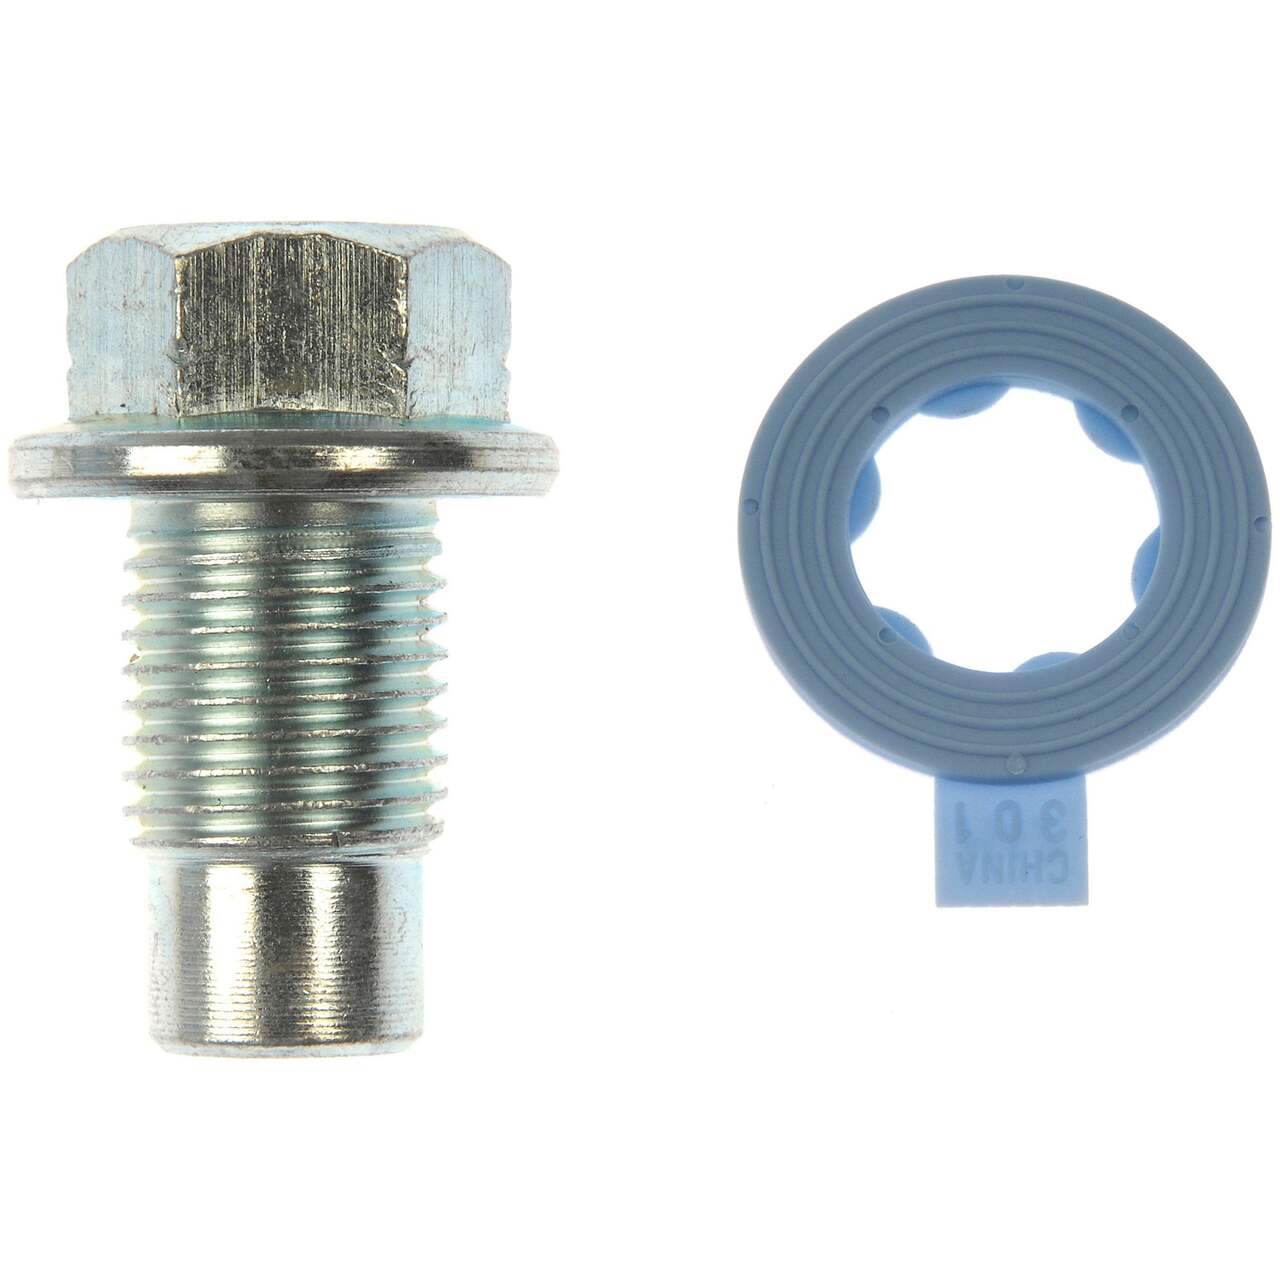 https://media-www.canadiantire.ca/product/automotive/auto-maintenance/oil-change-and-fuel-accessories/0176600/65217-oil-drain-plug-261f427c-4b4e-4e23-bf6d-297587d517c4-jpgrendition.jpg?imdensity=1&imwidth=640&impolicy=mZoom